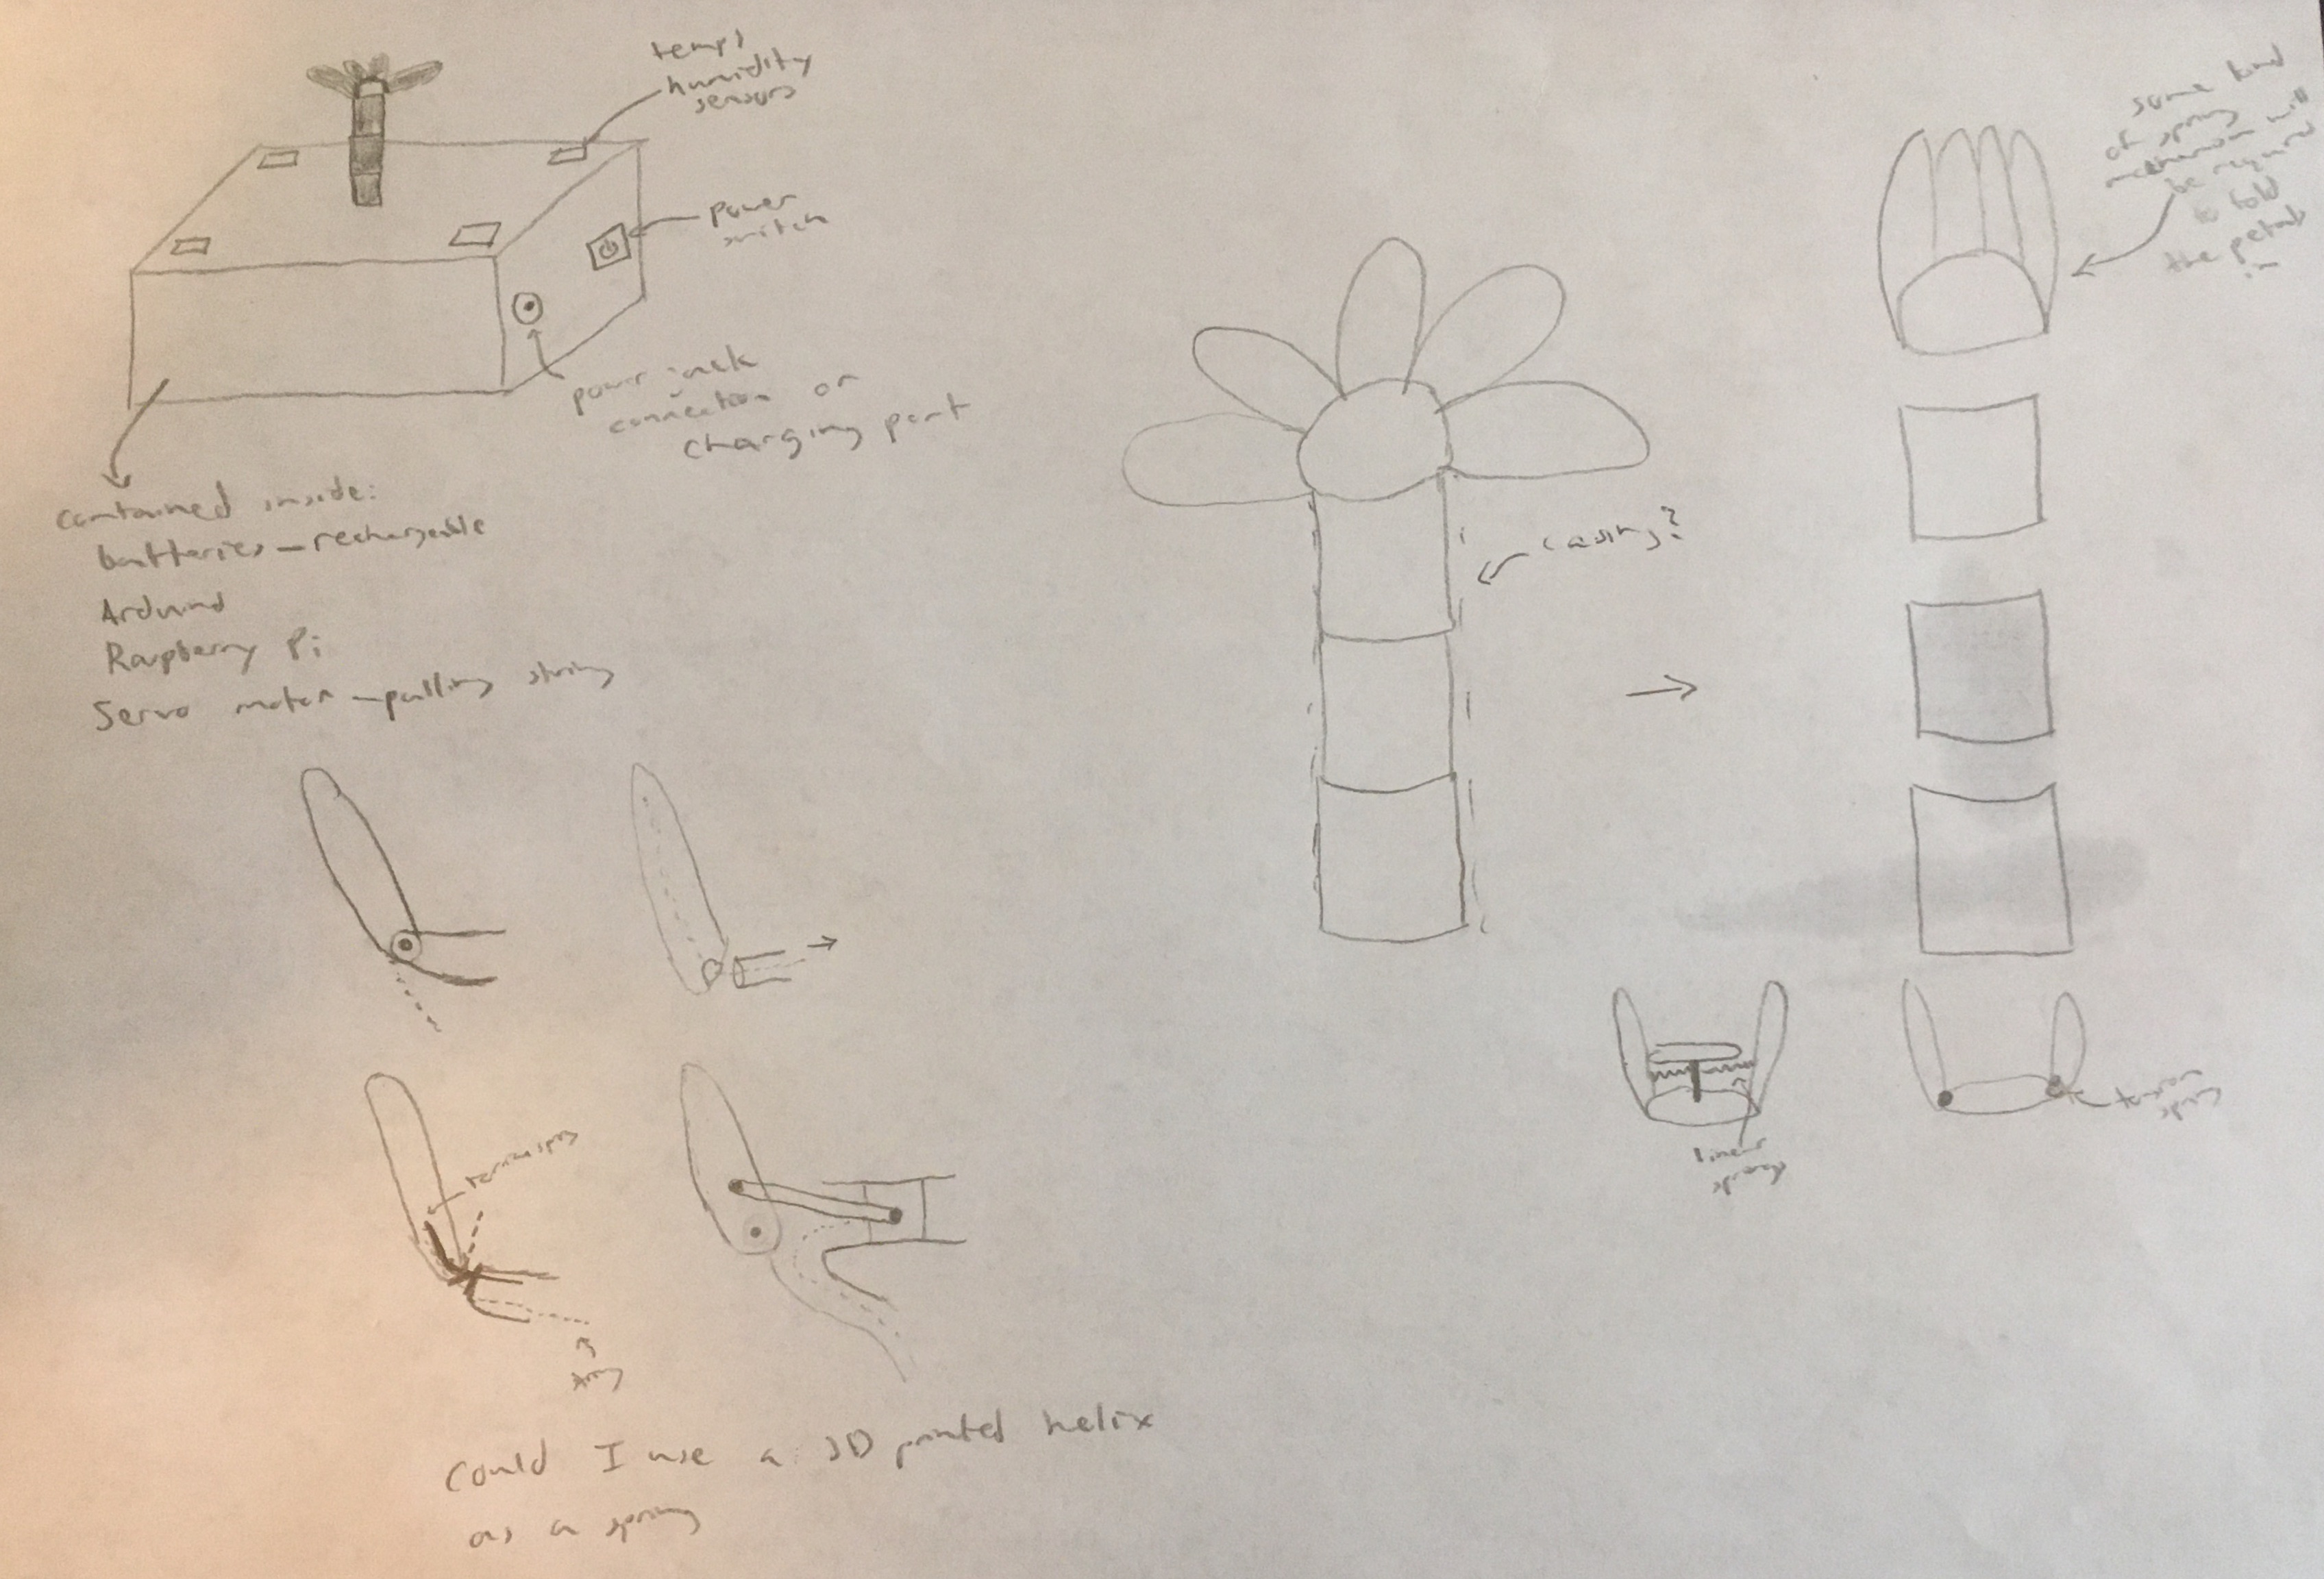 Sketch Showing Box and Different Flower Head Designs